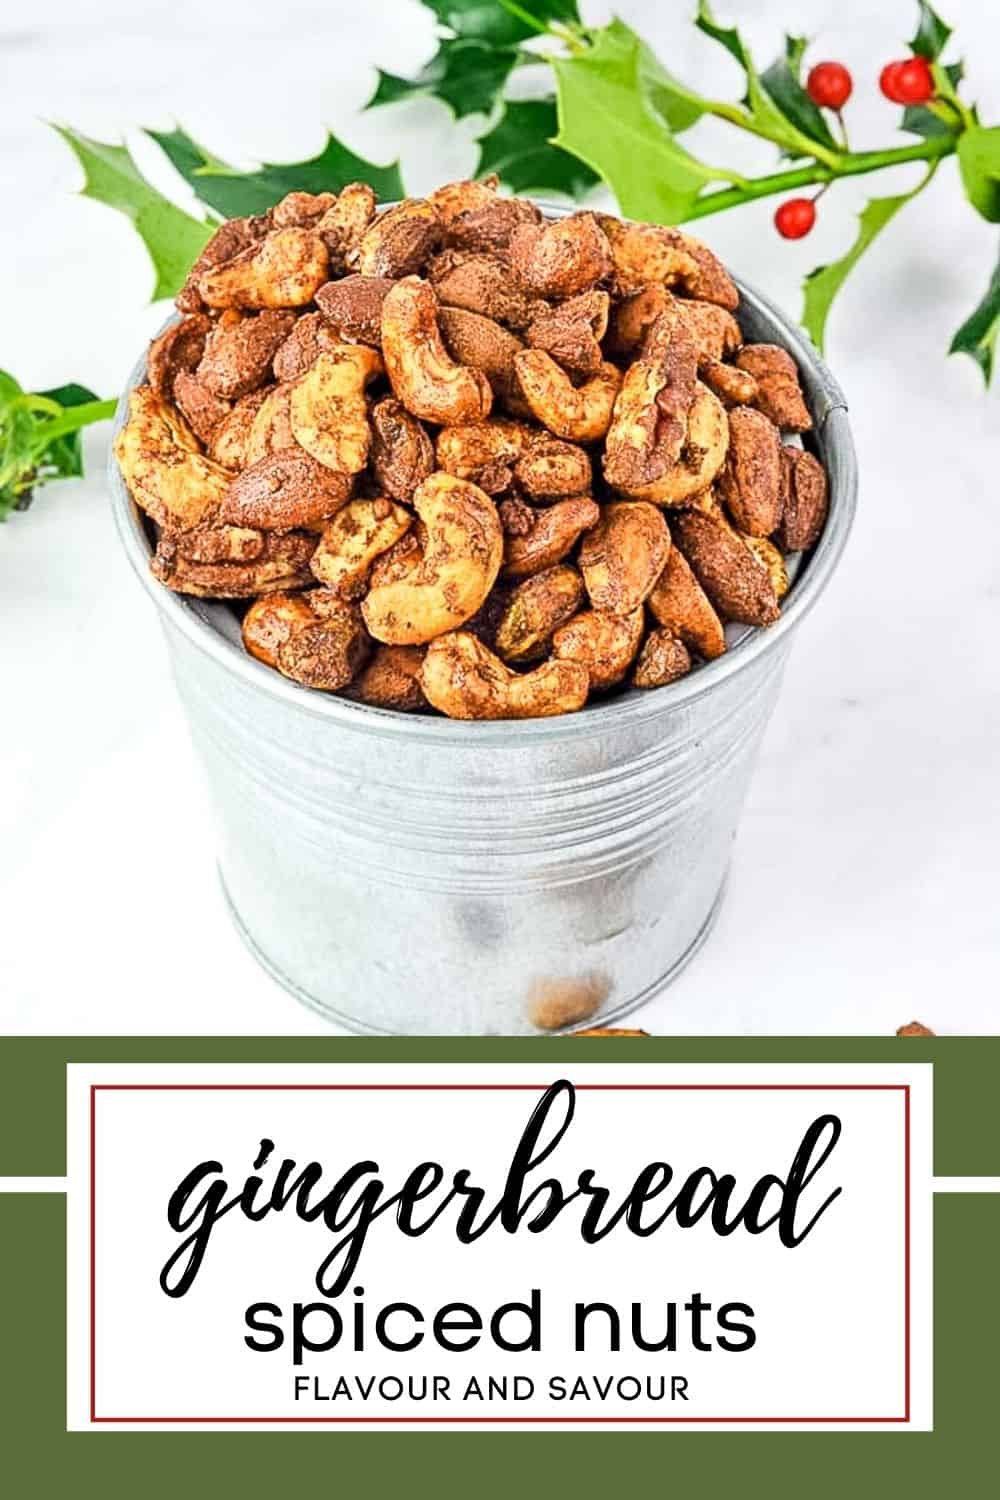 image with text for gingerbread spiced nuts